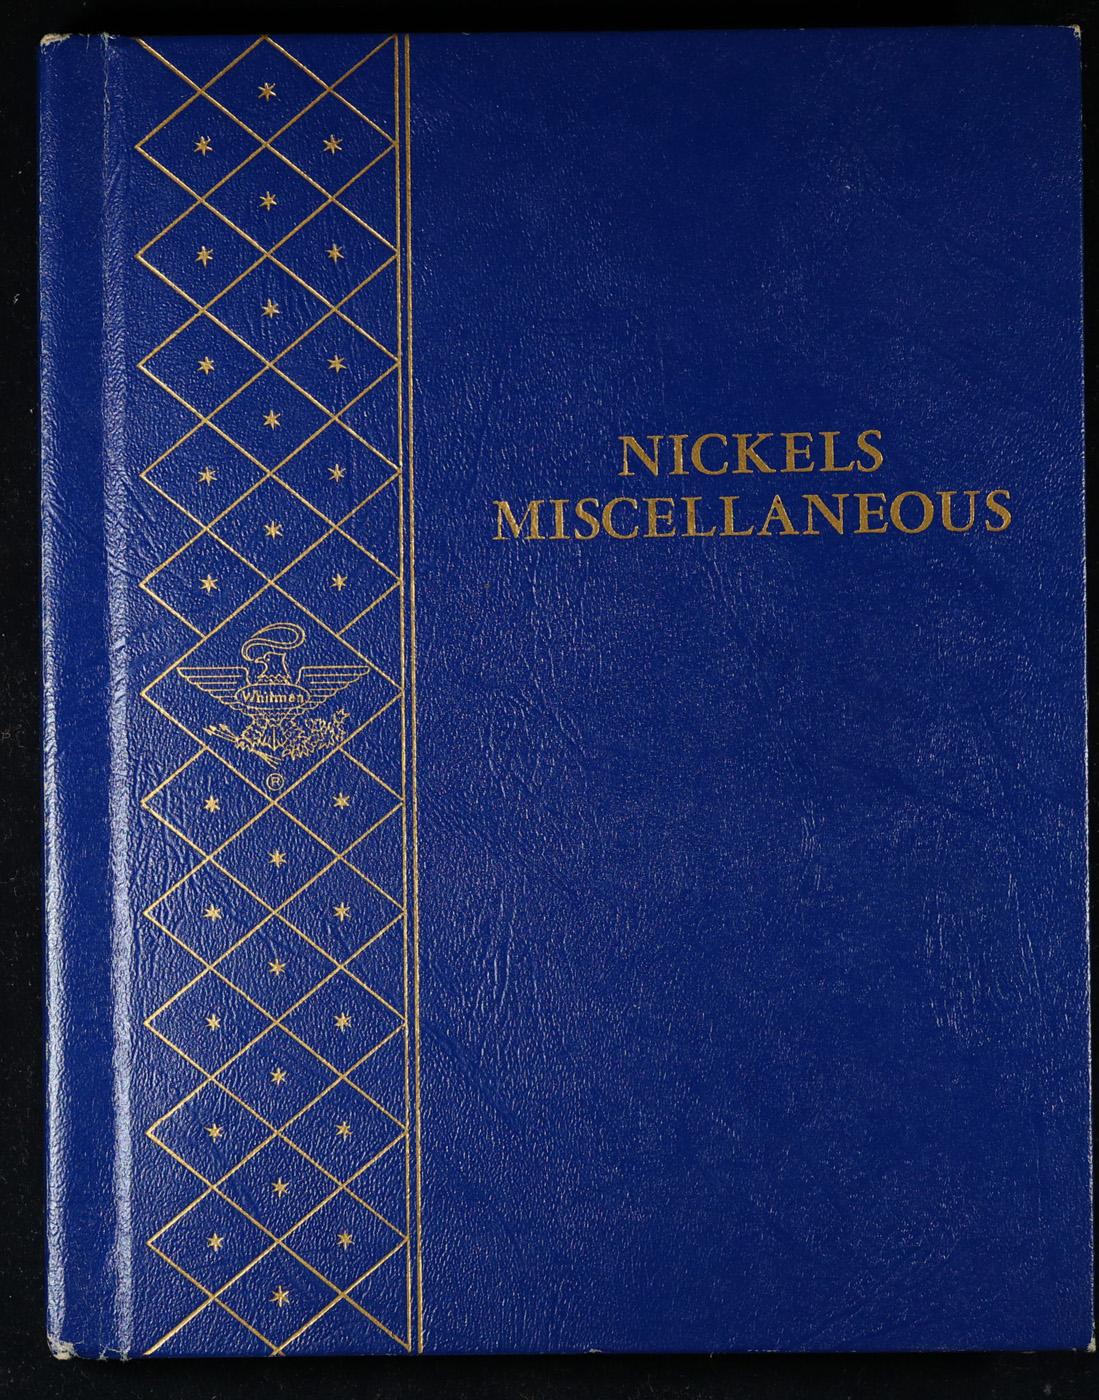 Whitman Miscellaneous Nickels Collectors Book - No Coins Included